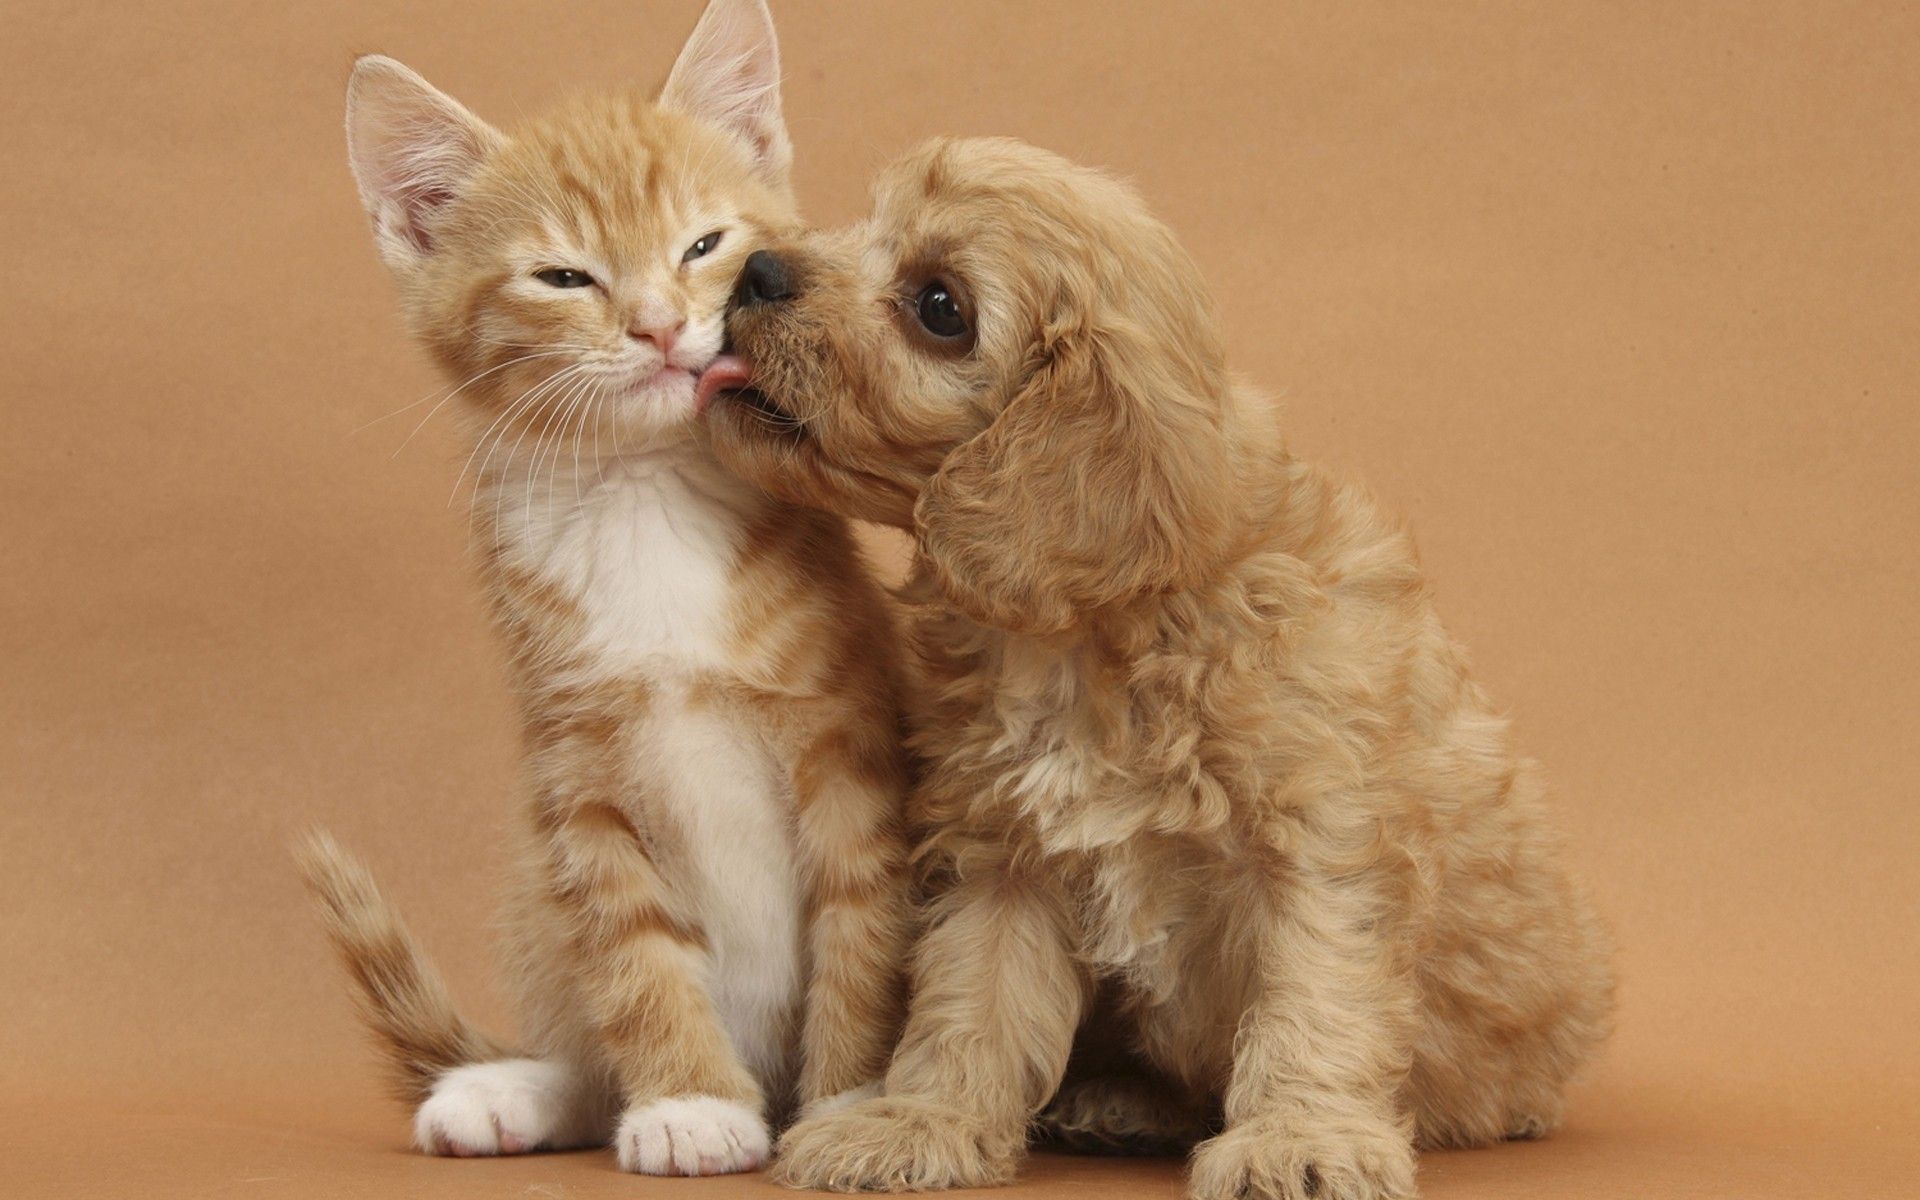 Dog and Cat Kissing